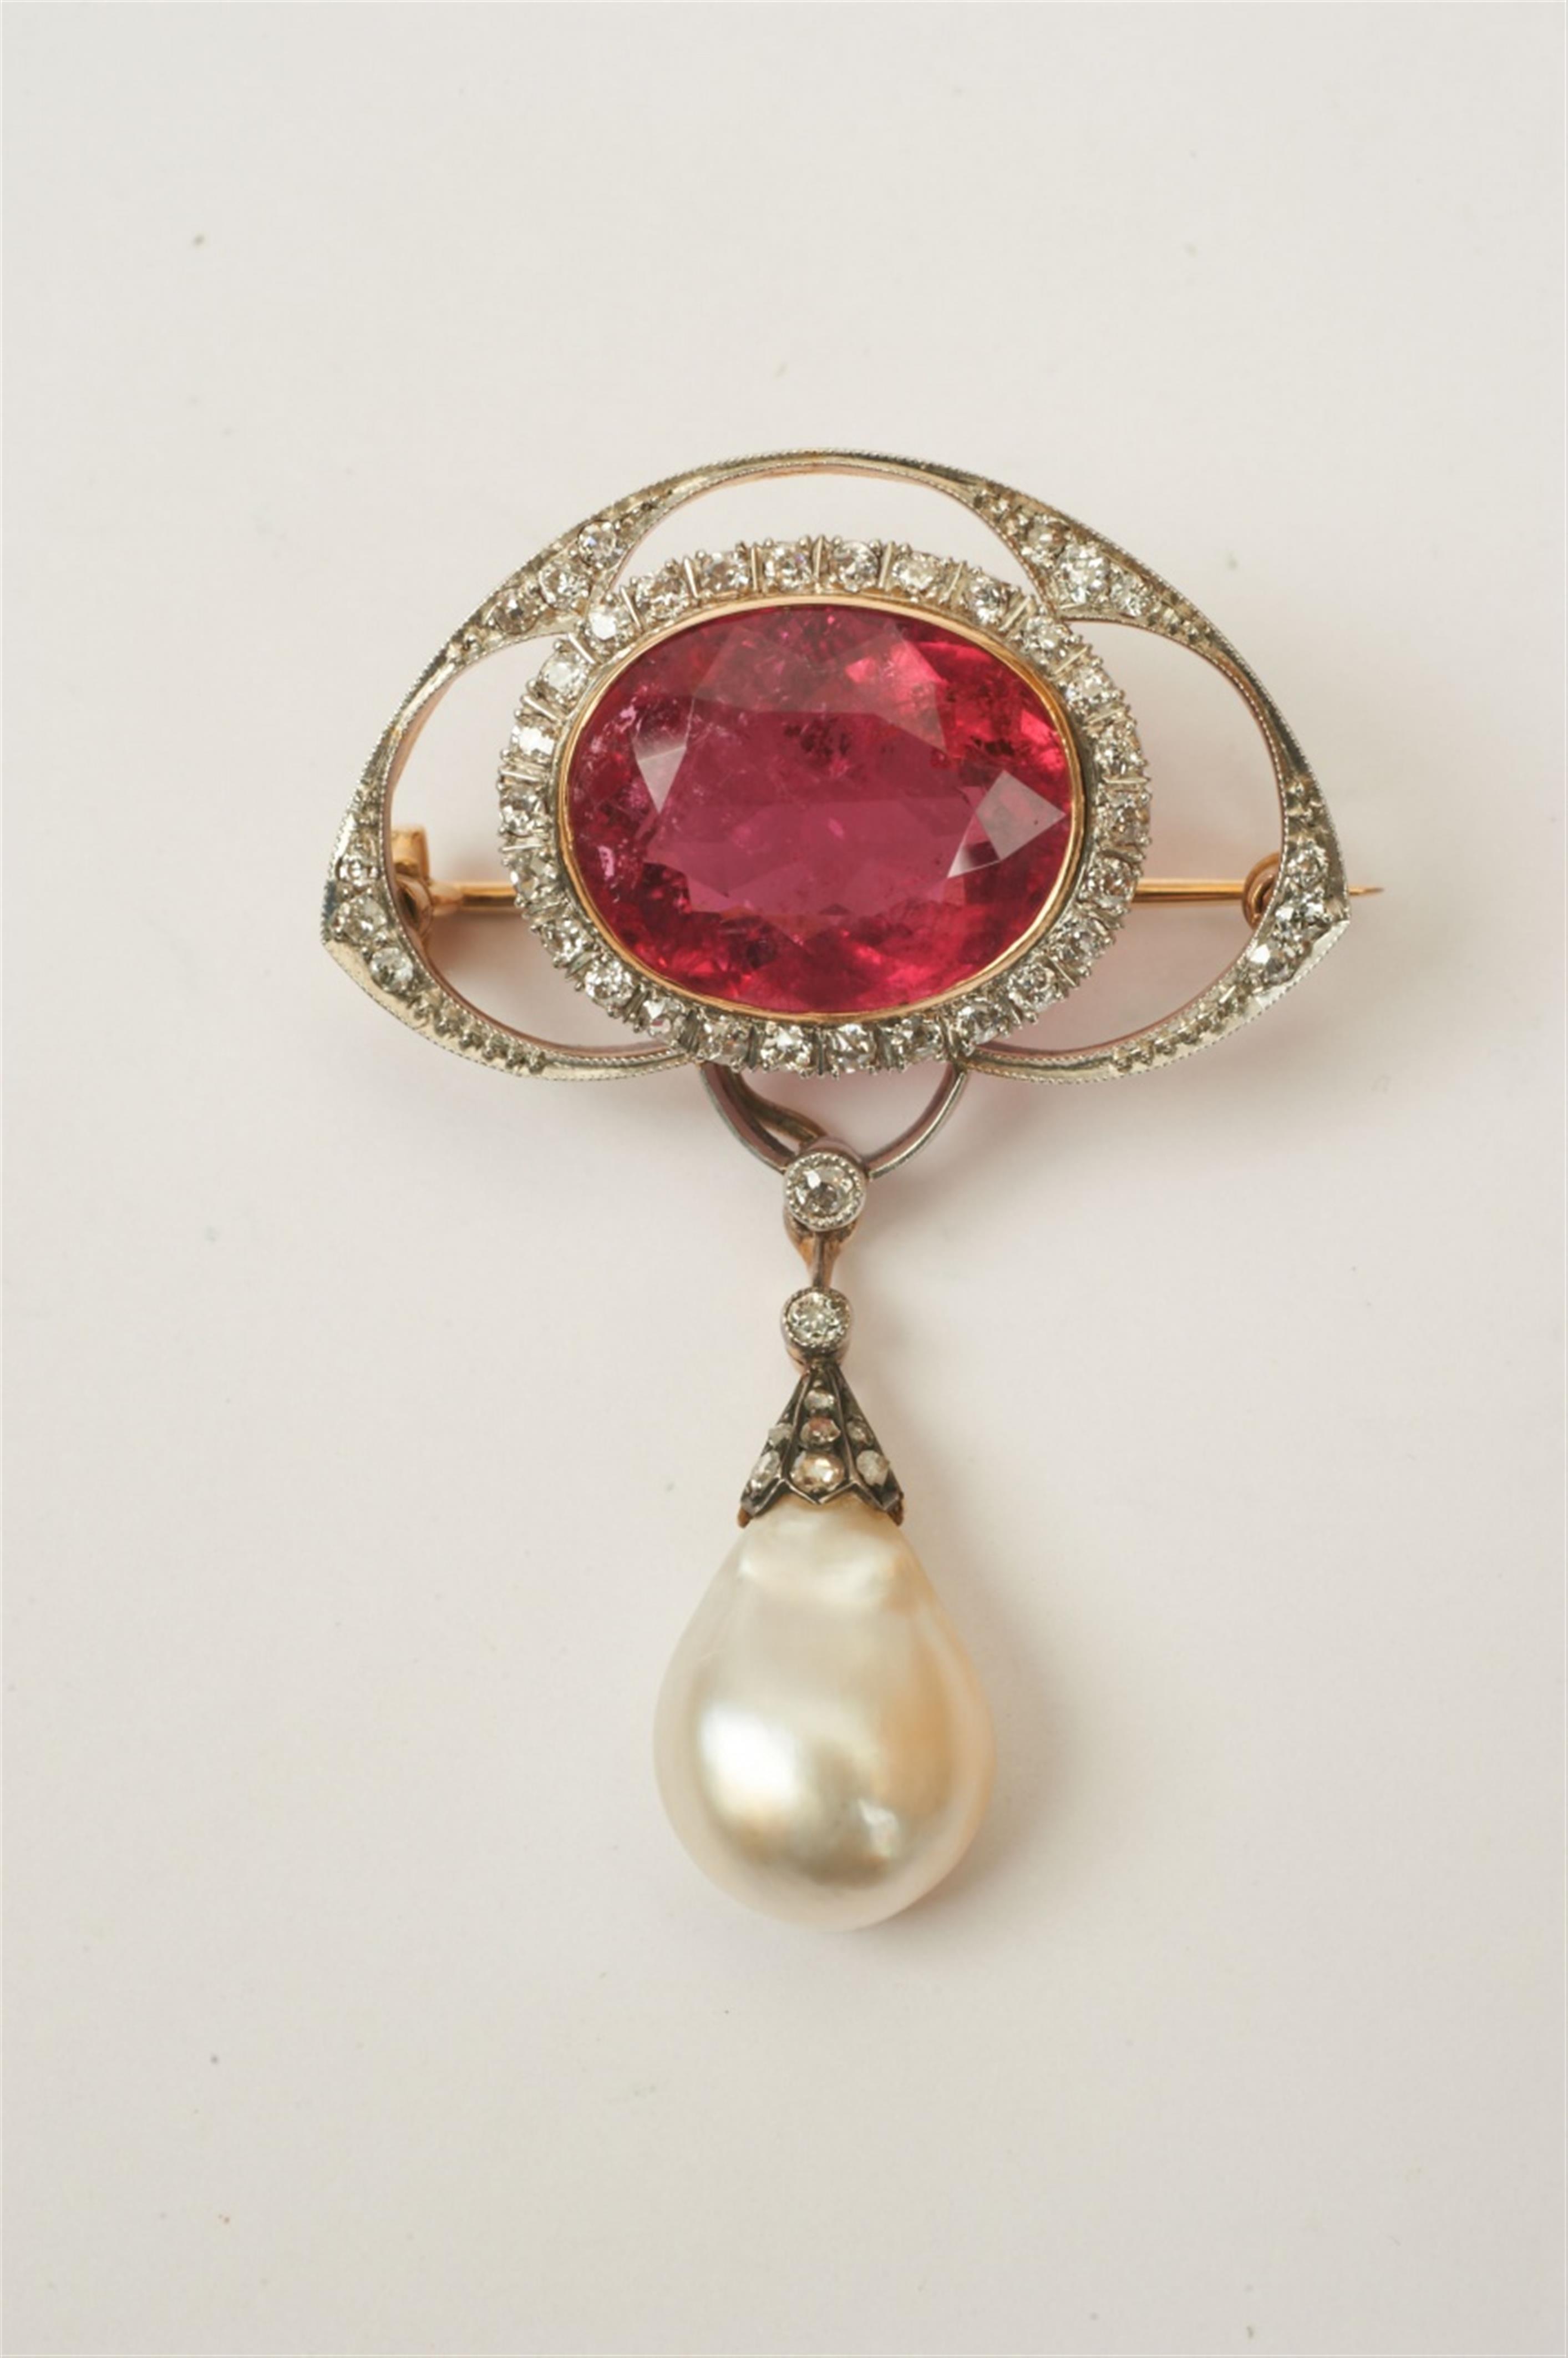 A German 14k gold, diamond and pink rubelite Belle Epoque brooch with an Oriental pearl droplet - image-1